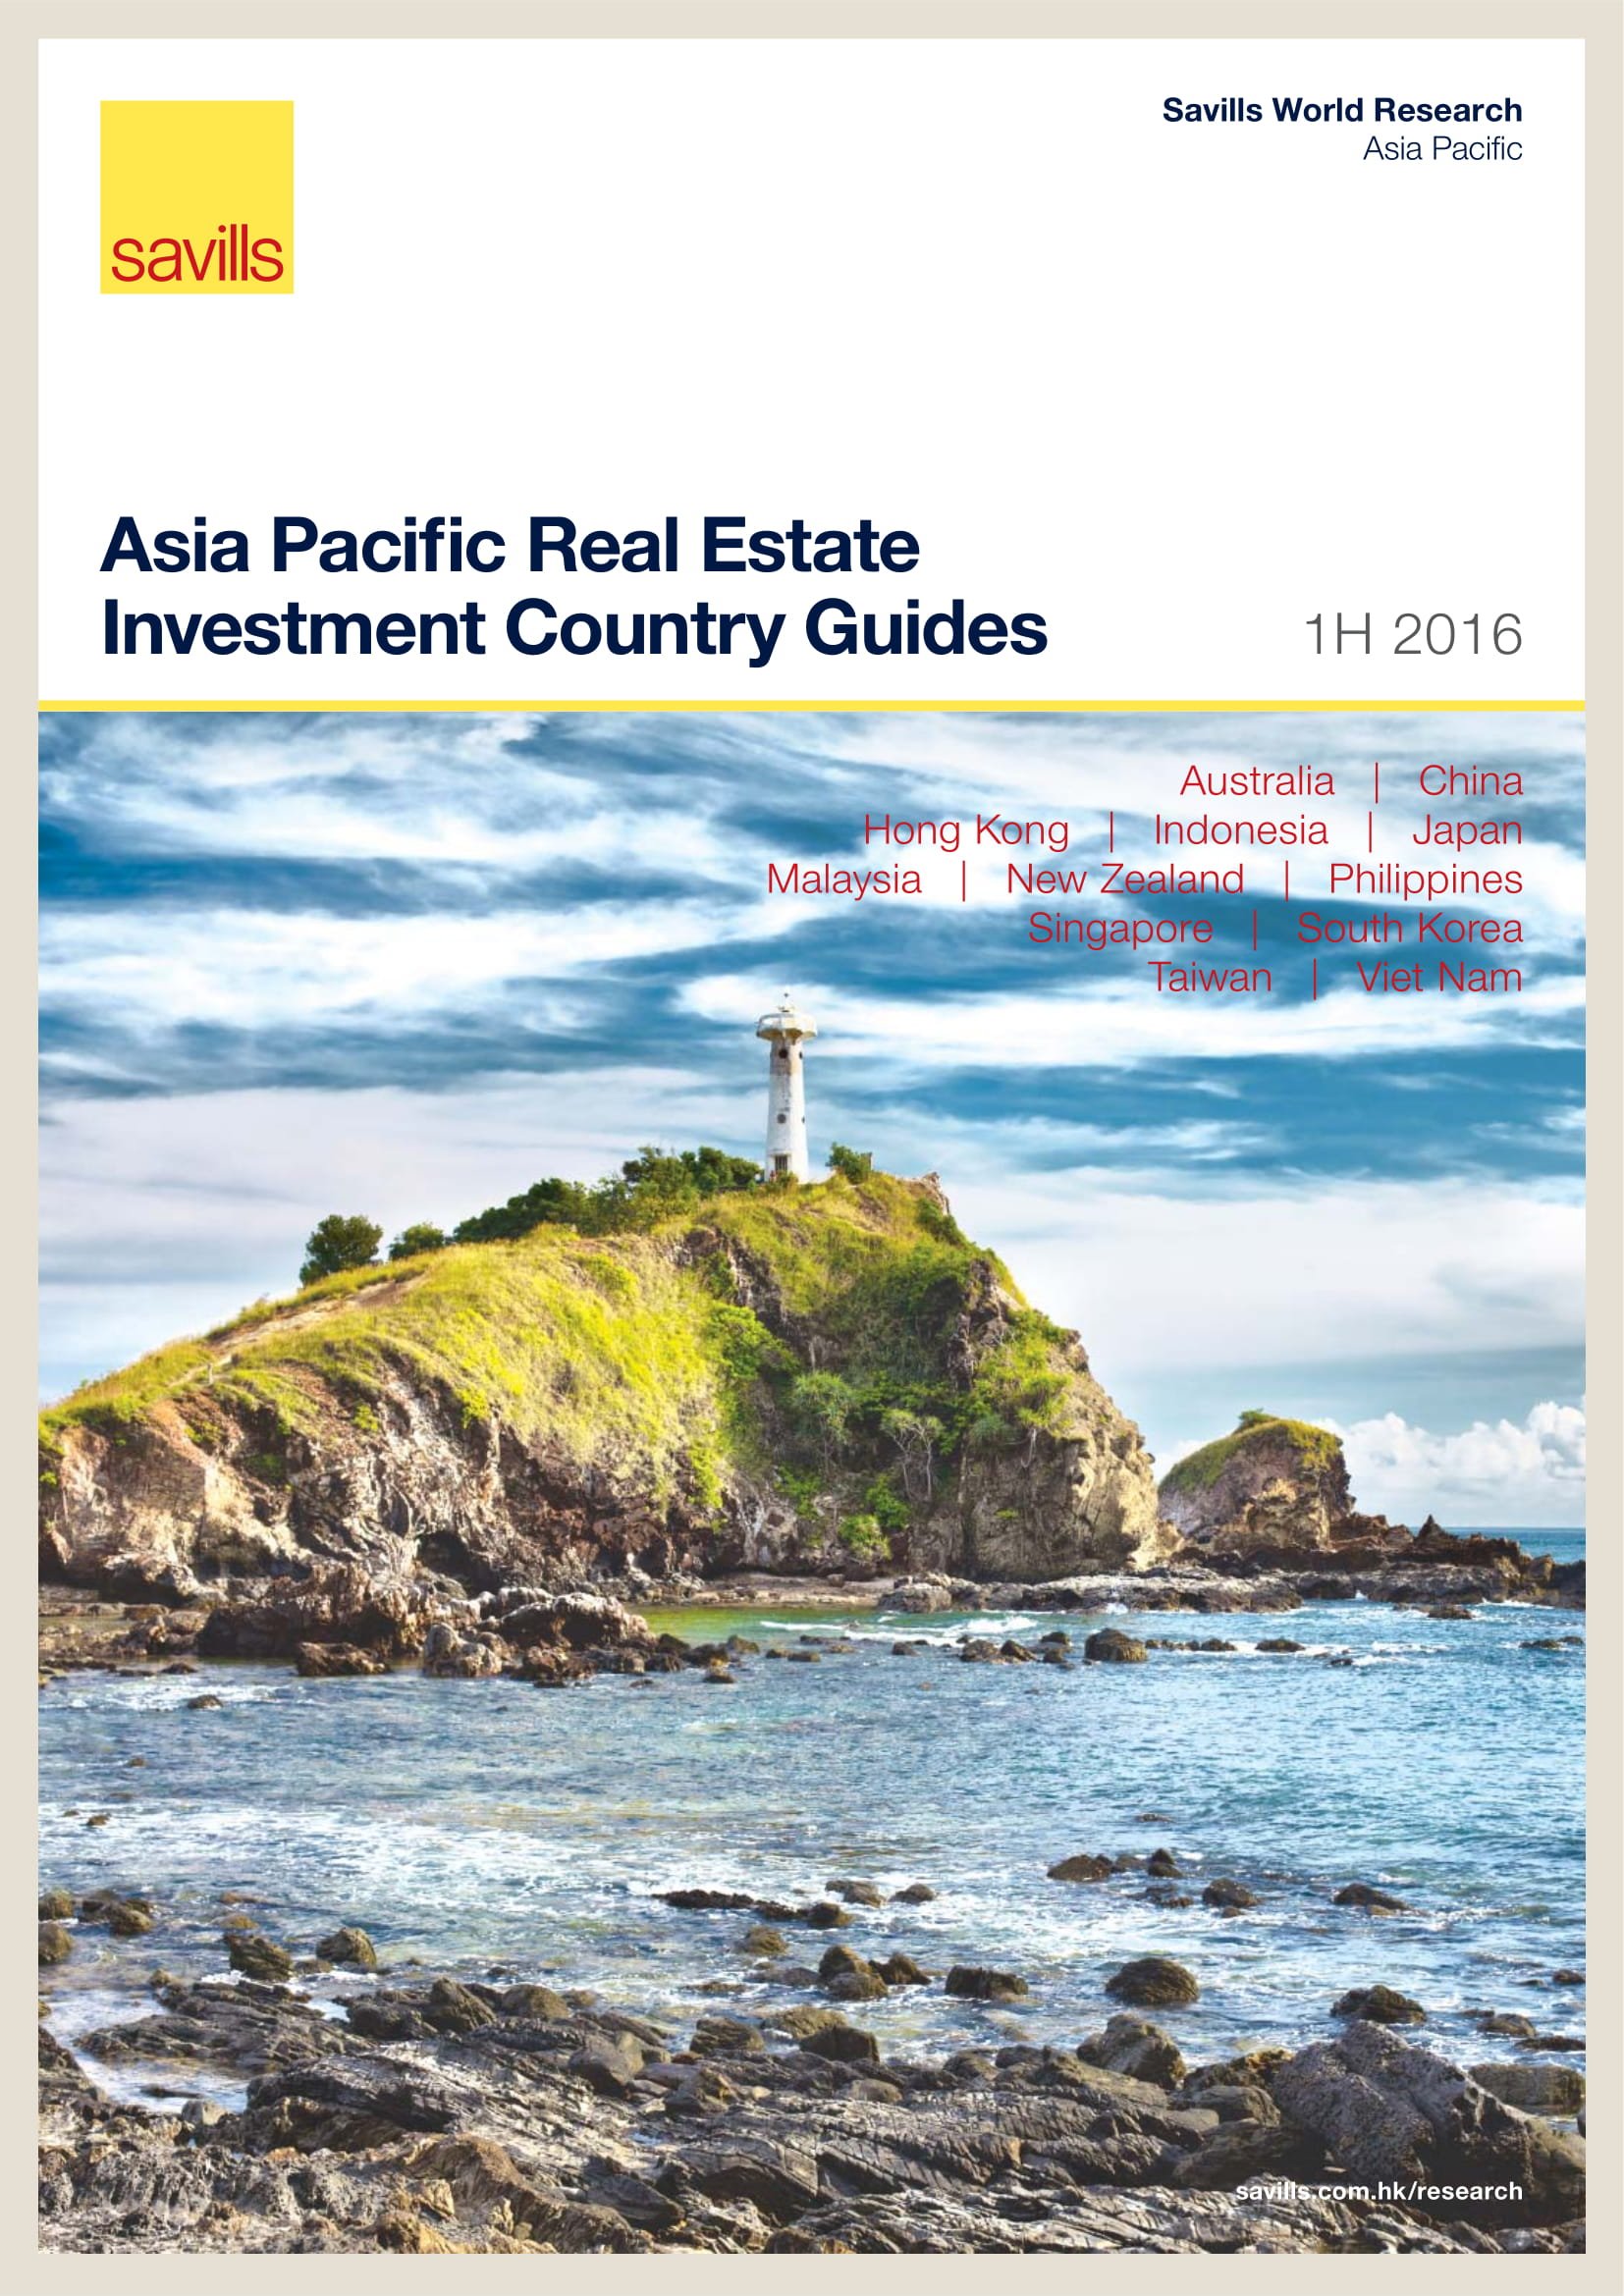 Asia Pacific Real Estate Investment Country Guides 1H 2016